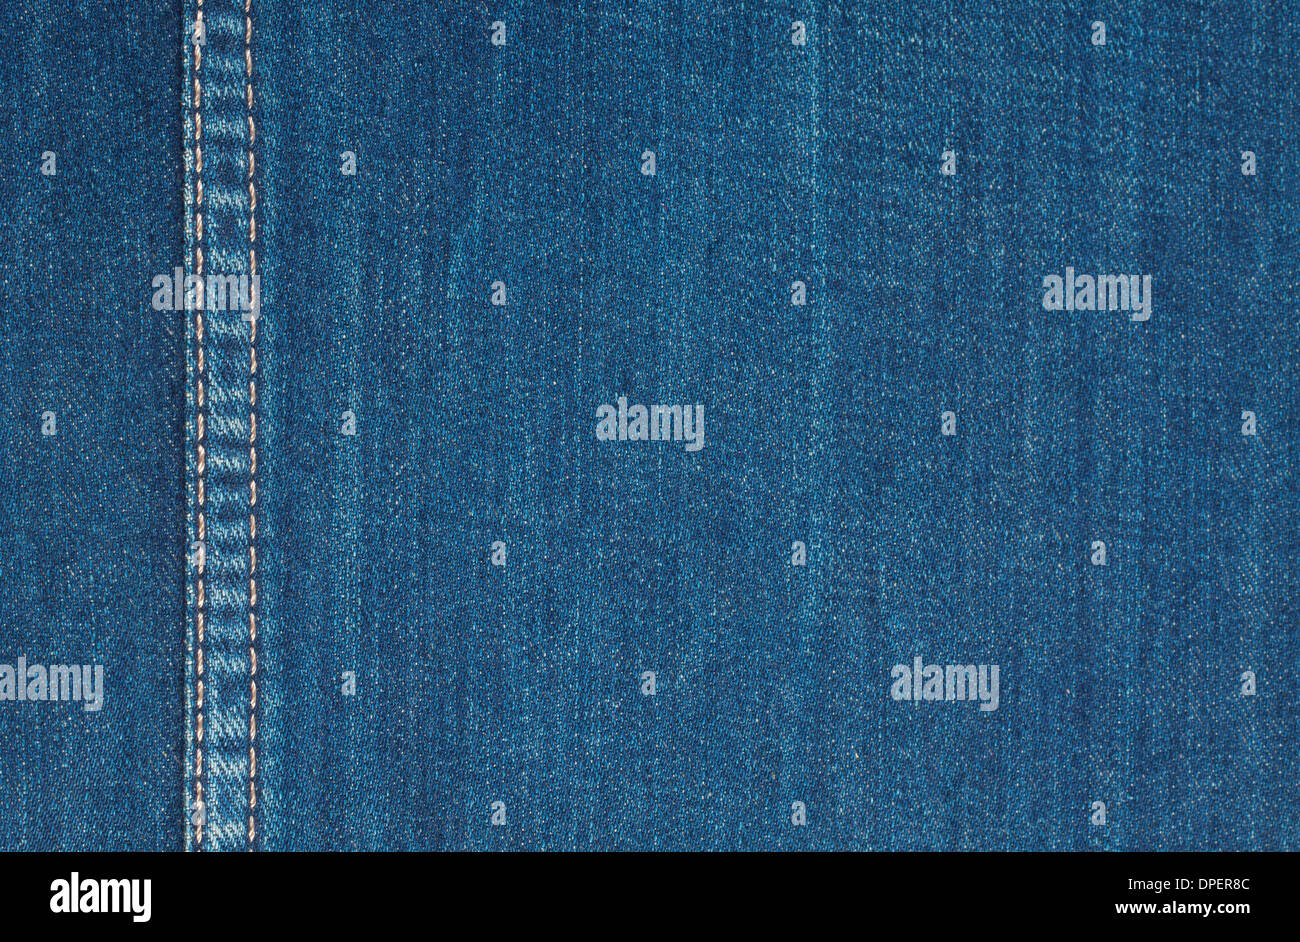 Background of rough denim fabric with vertical seam Stock Photo